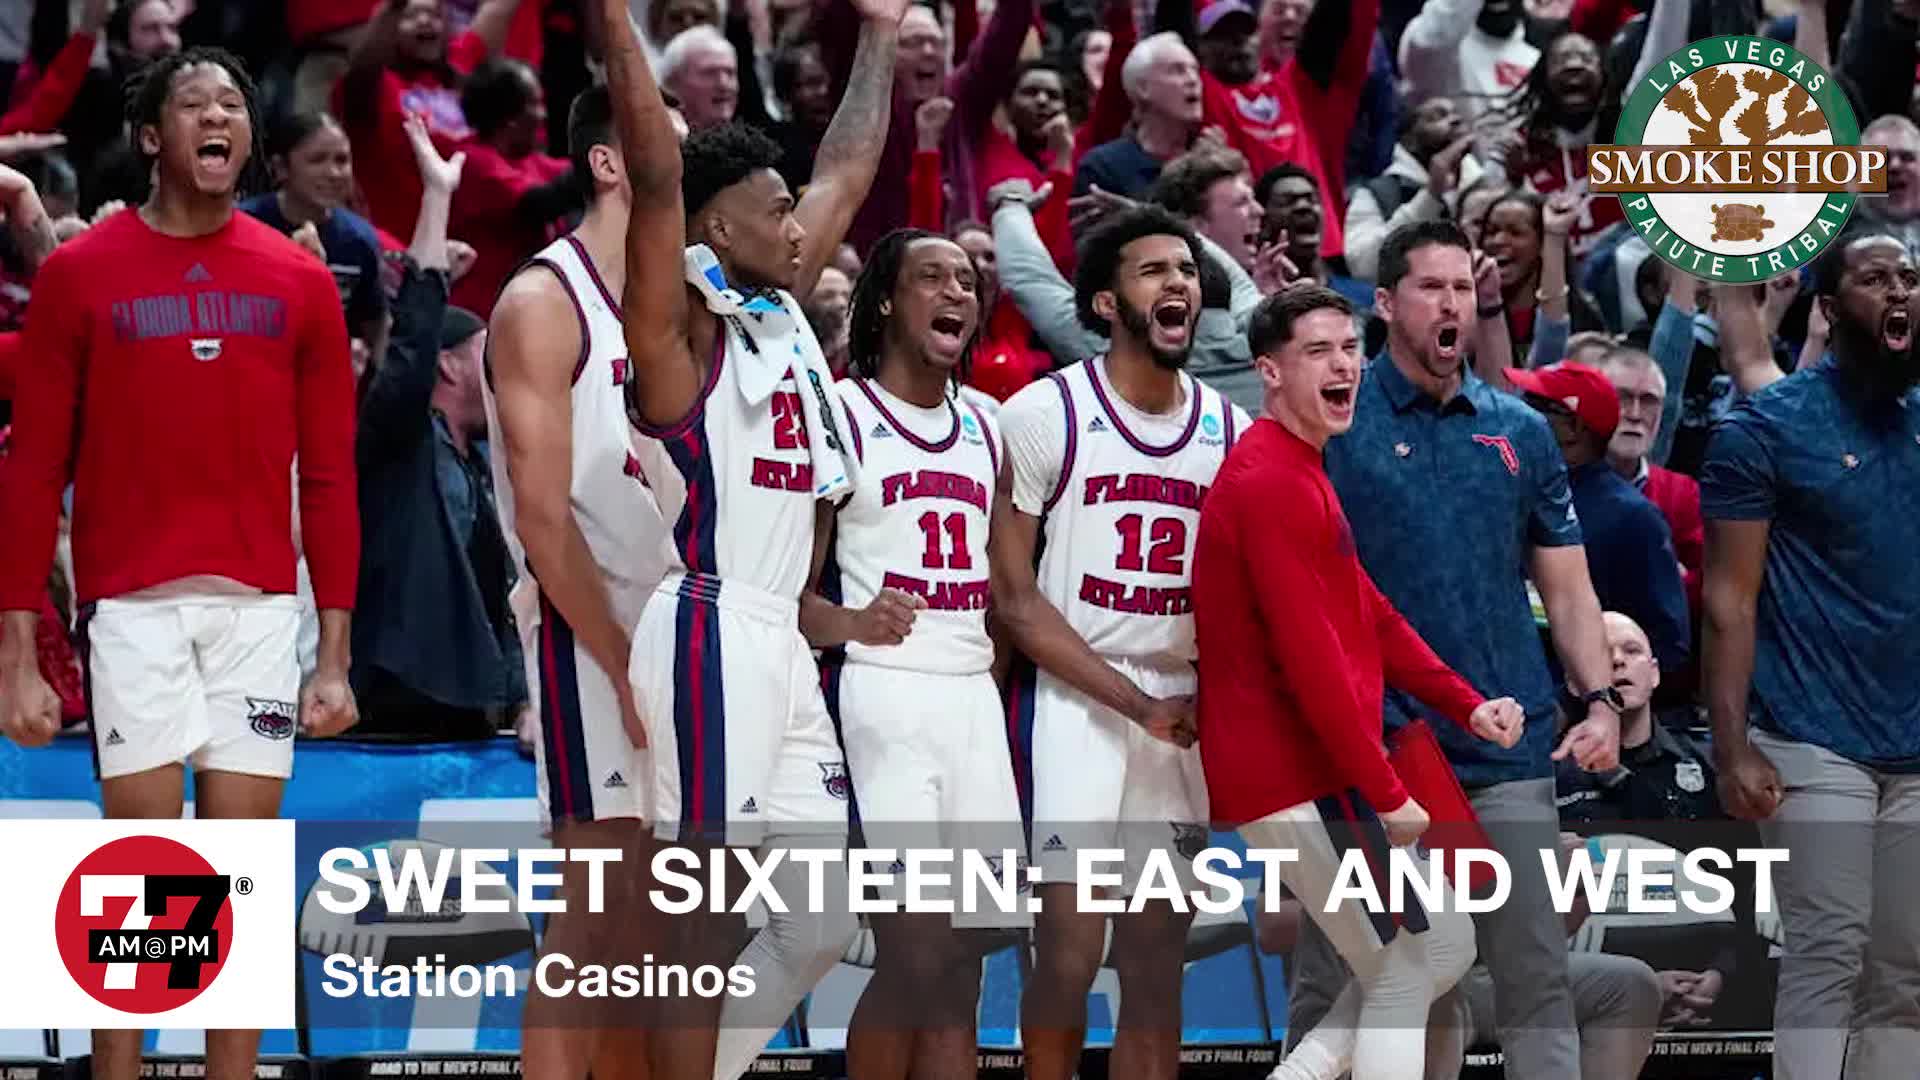 Sweet Sixteen: east and west